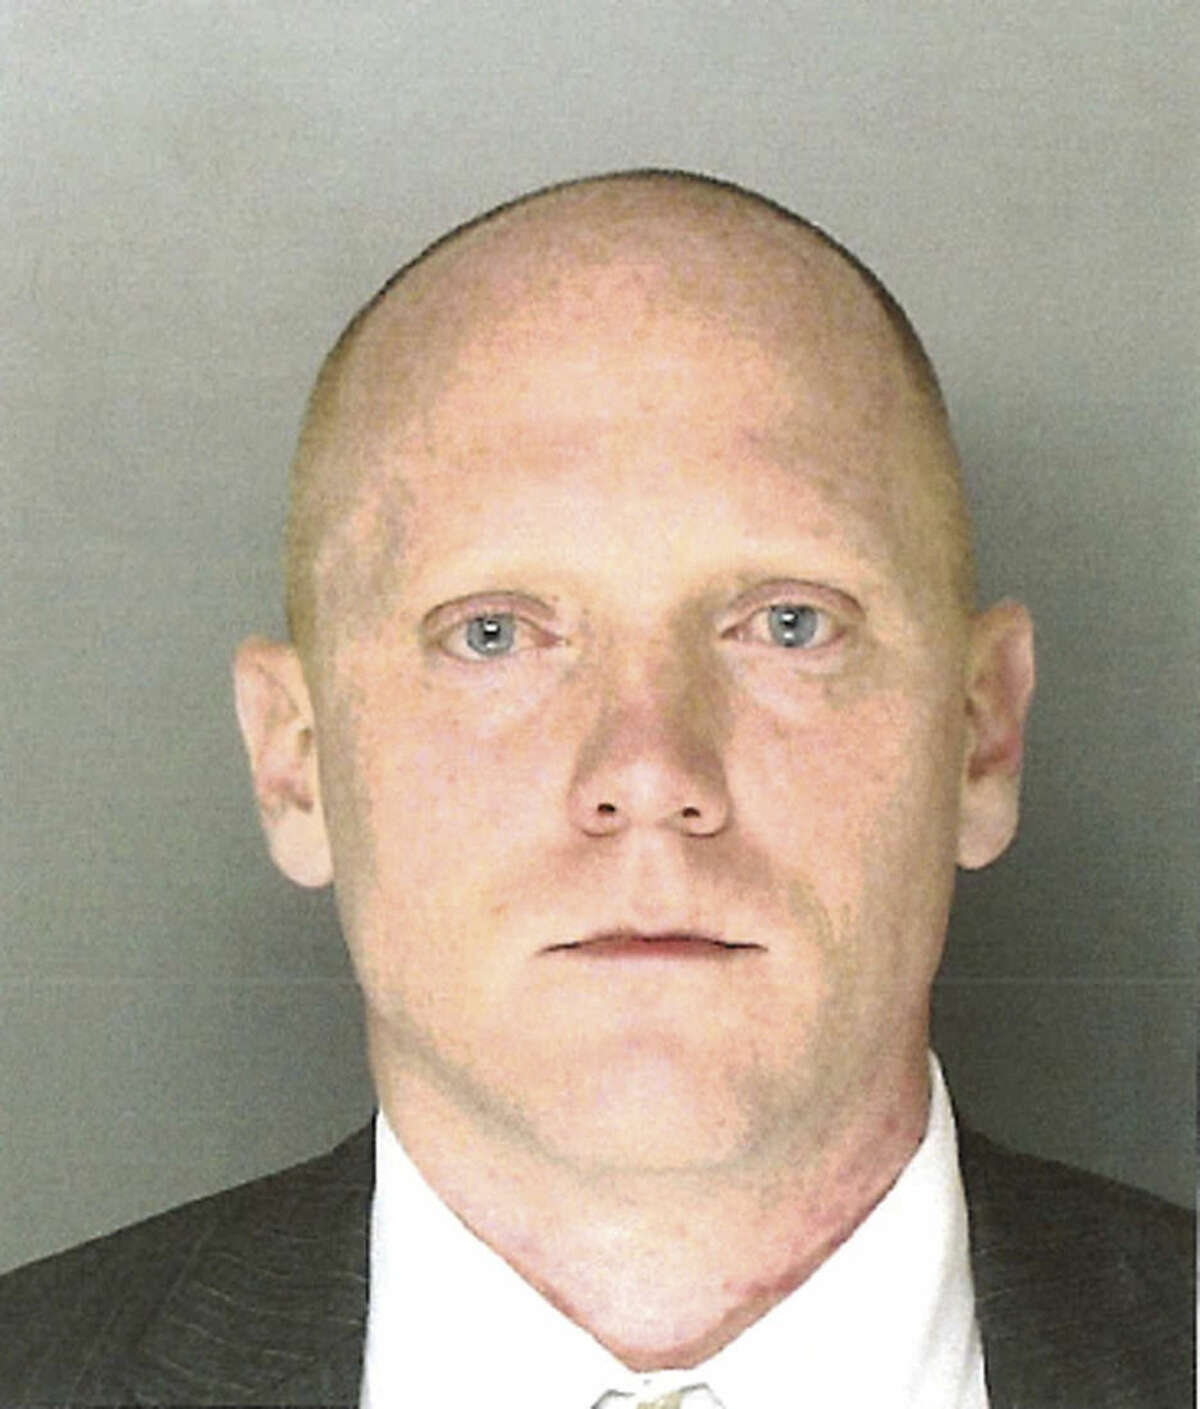 This undated photo provided by the Montgomery County Office of the District Attorney in Norristown, Pa., shows Bradley William Stone, 35, of Pennsburg, Pa., a suspect in six shooting deaths in Montgomery County on Monday, Dec. 15, 2014. District Attorney Risa Vetri Ferman said all of the victims have a "familial relationship" to Stone. (AP Photo/Montgomery County Office of the District Attorney)